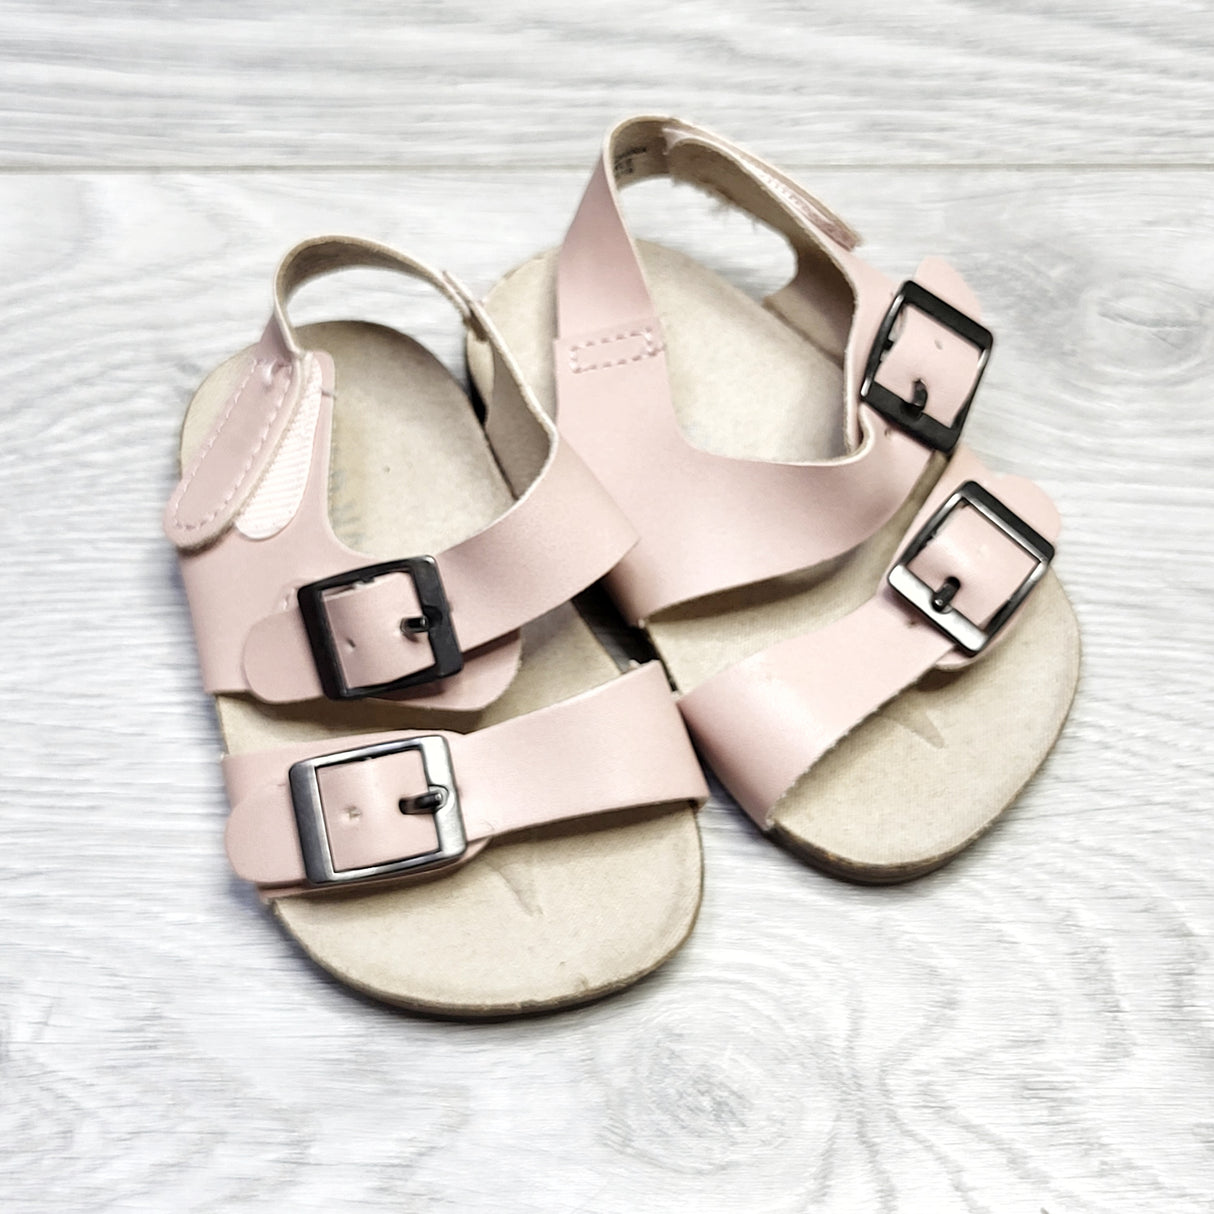 MSNDS11 - Old Navy pink sandals. Size 3-6 months